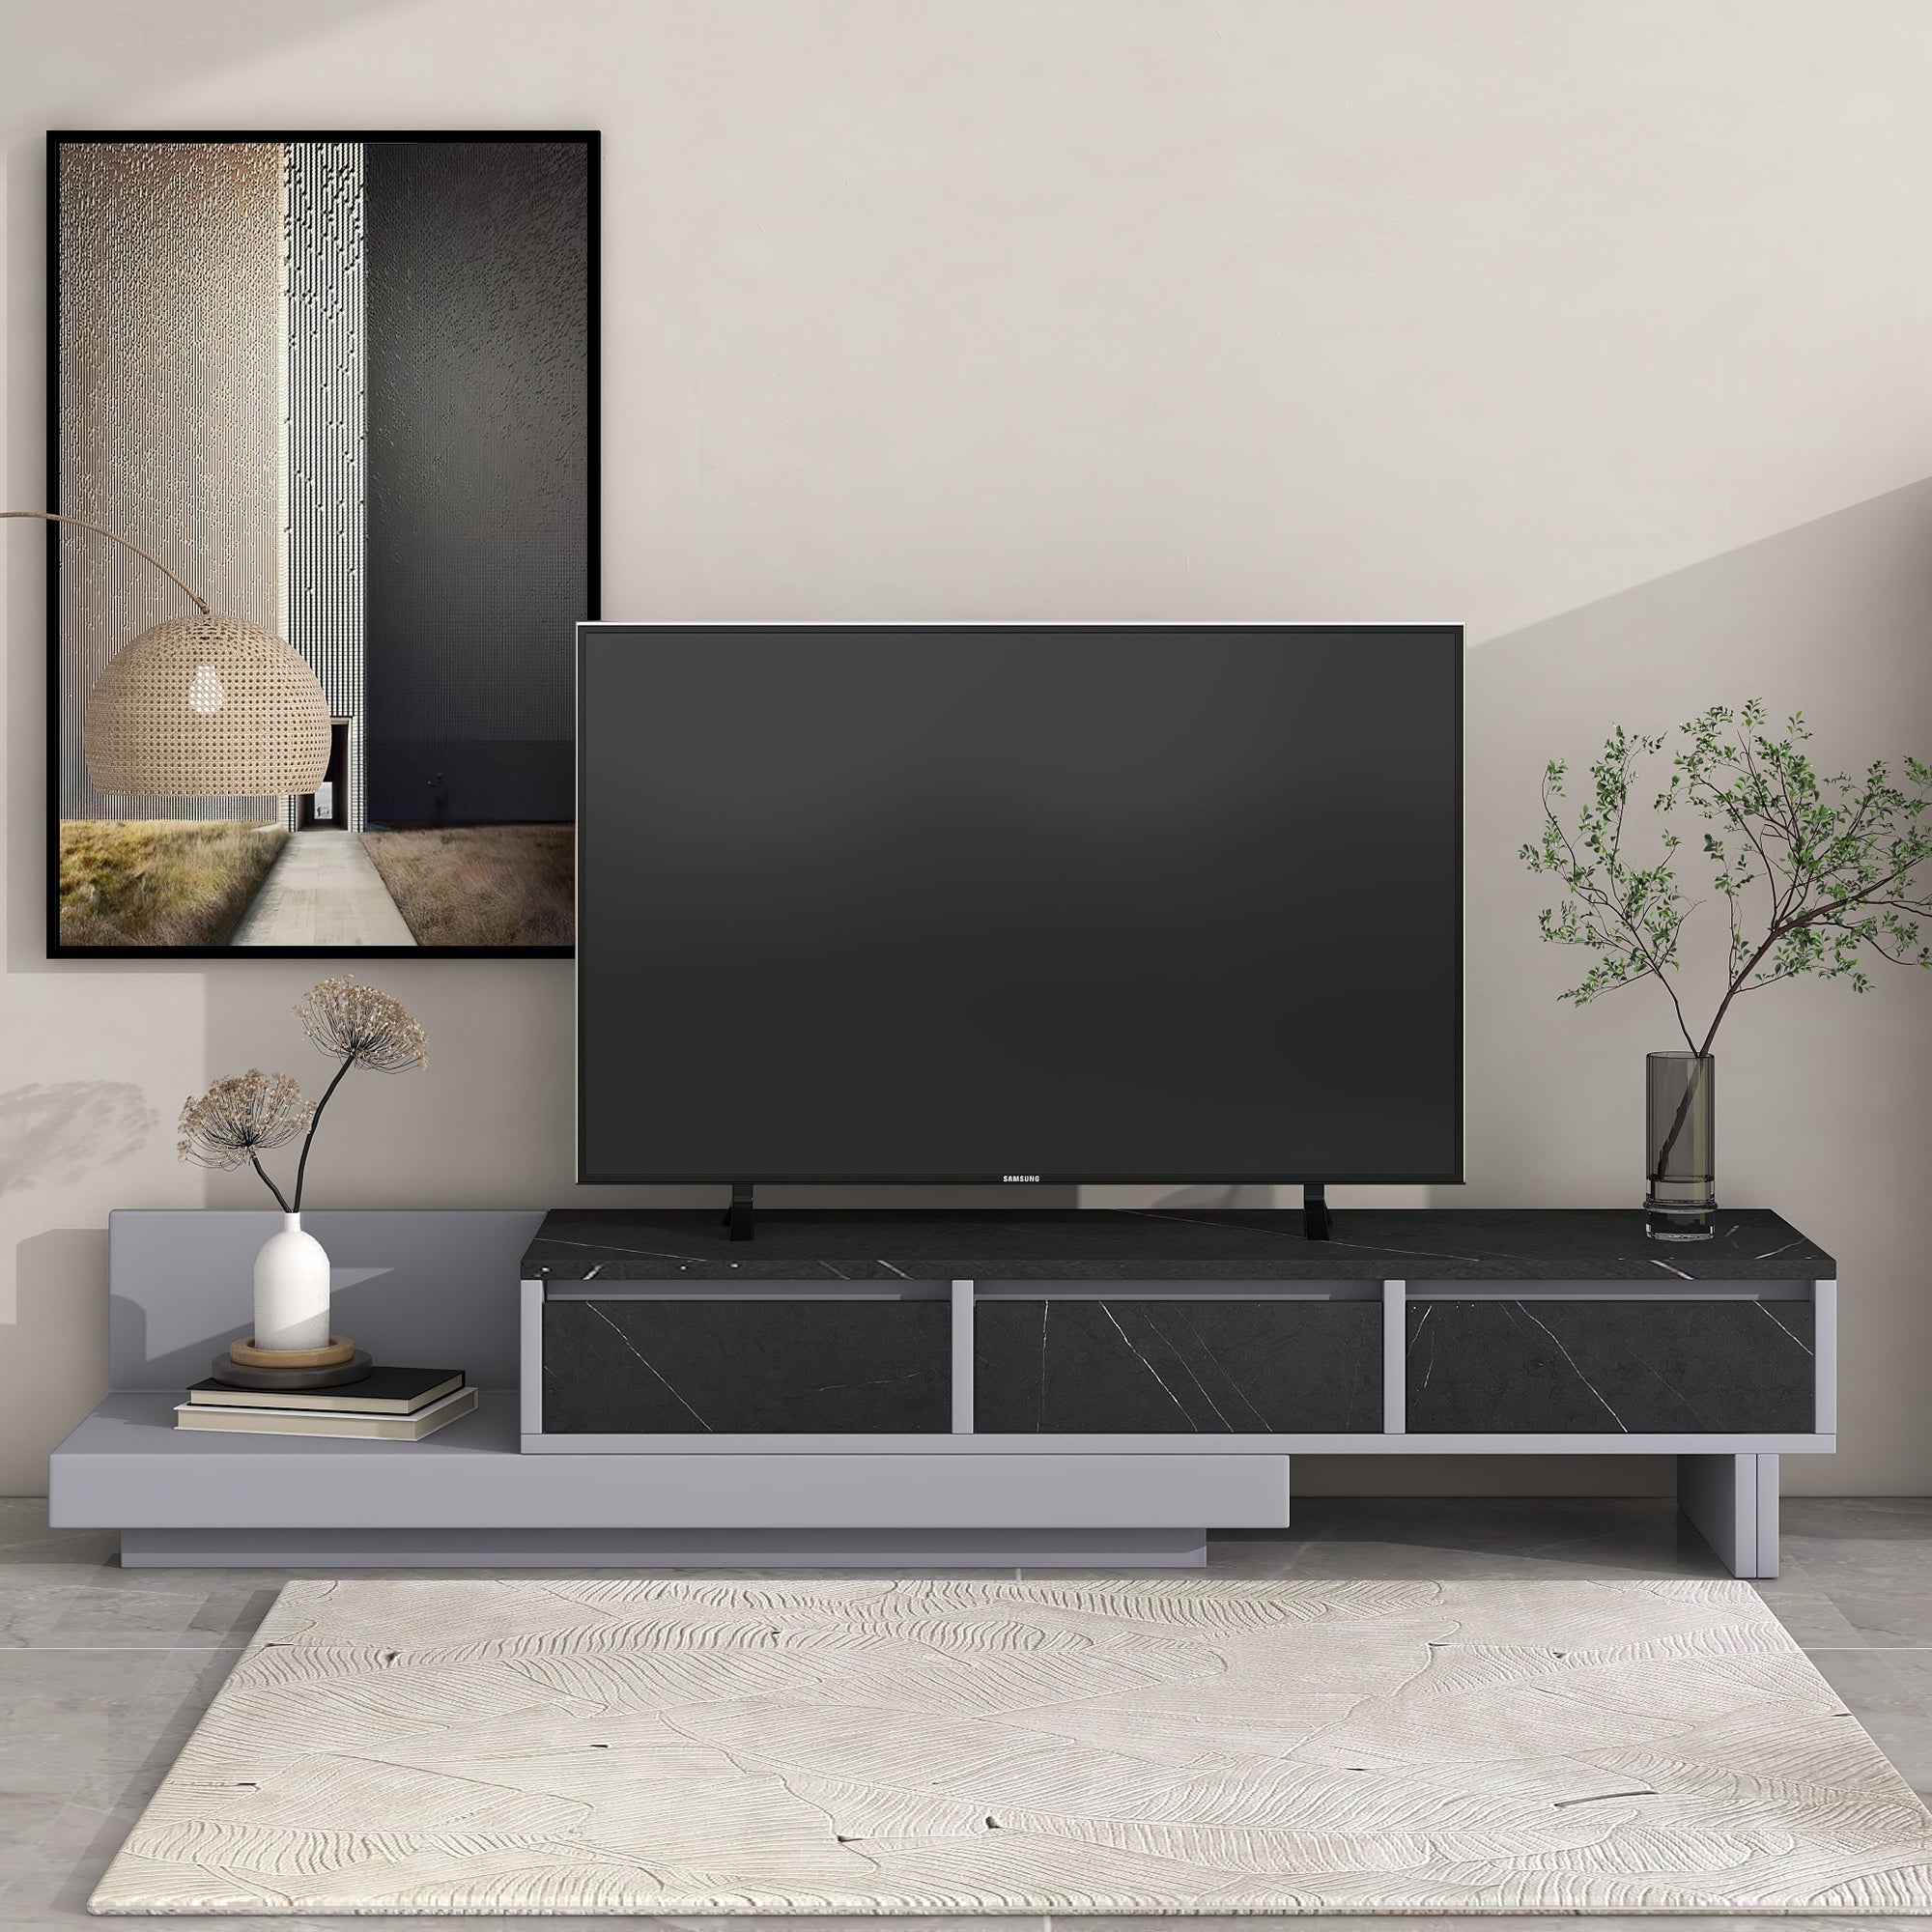 TV Stand with 3 Drawers & Open Storage Compartments, Black